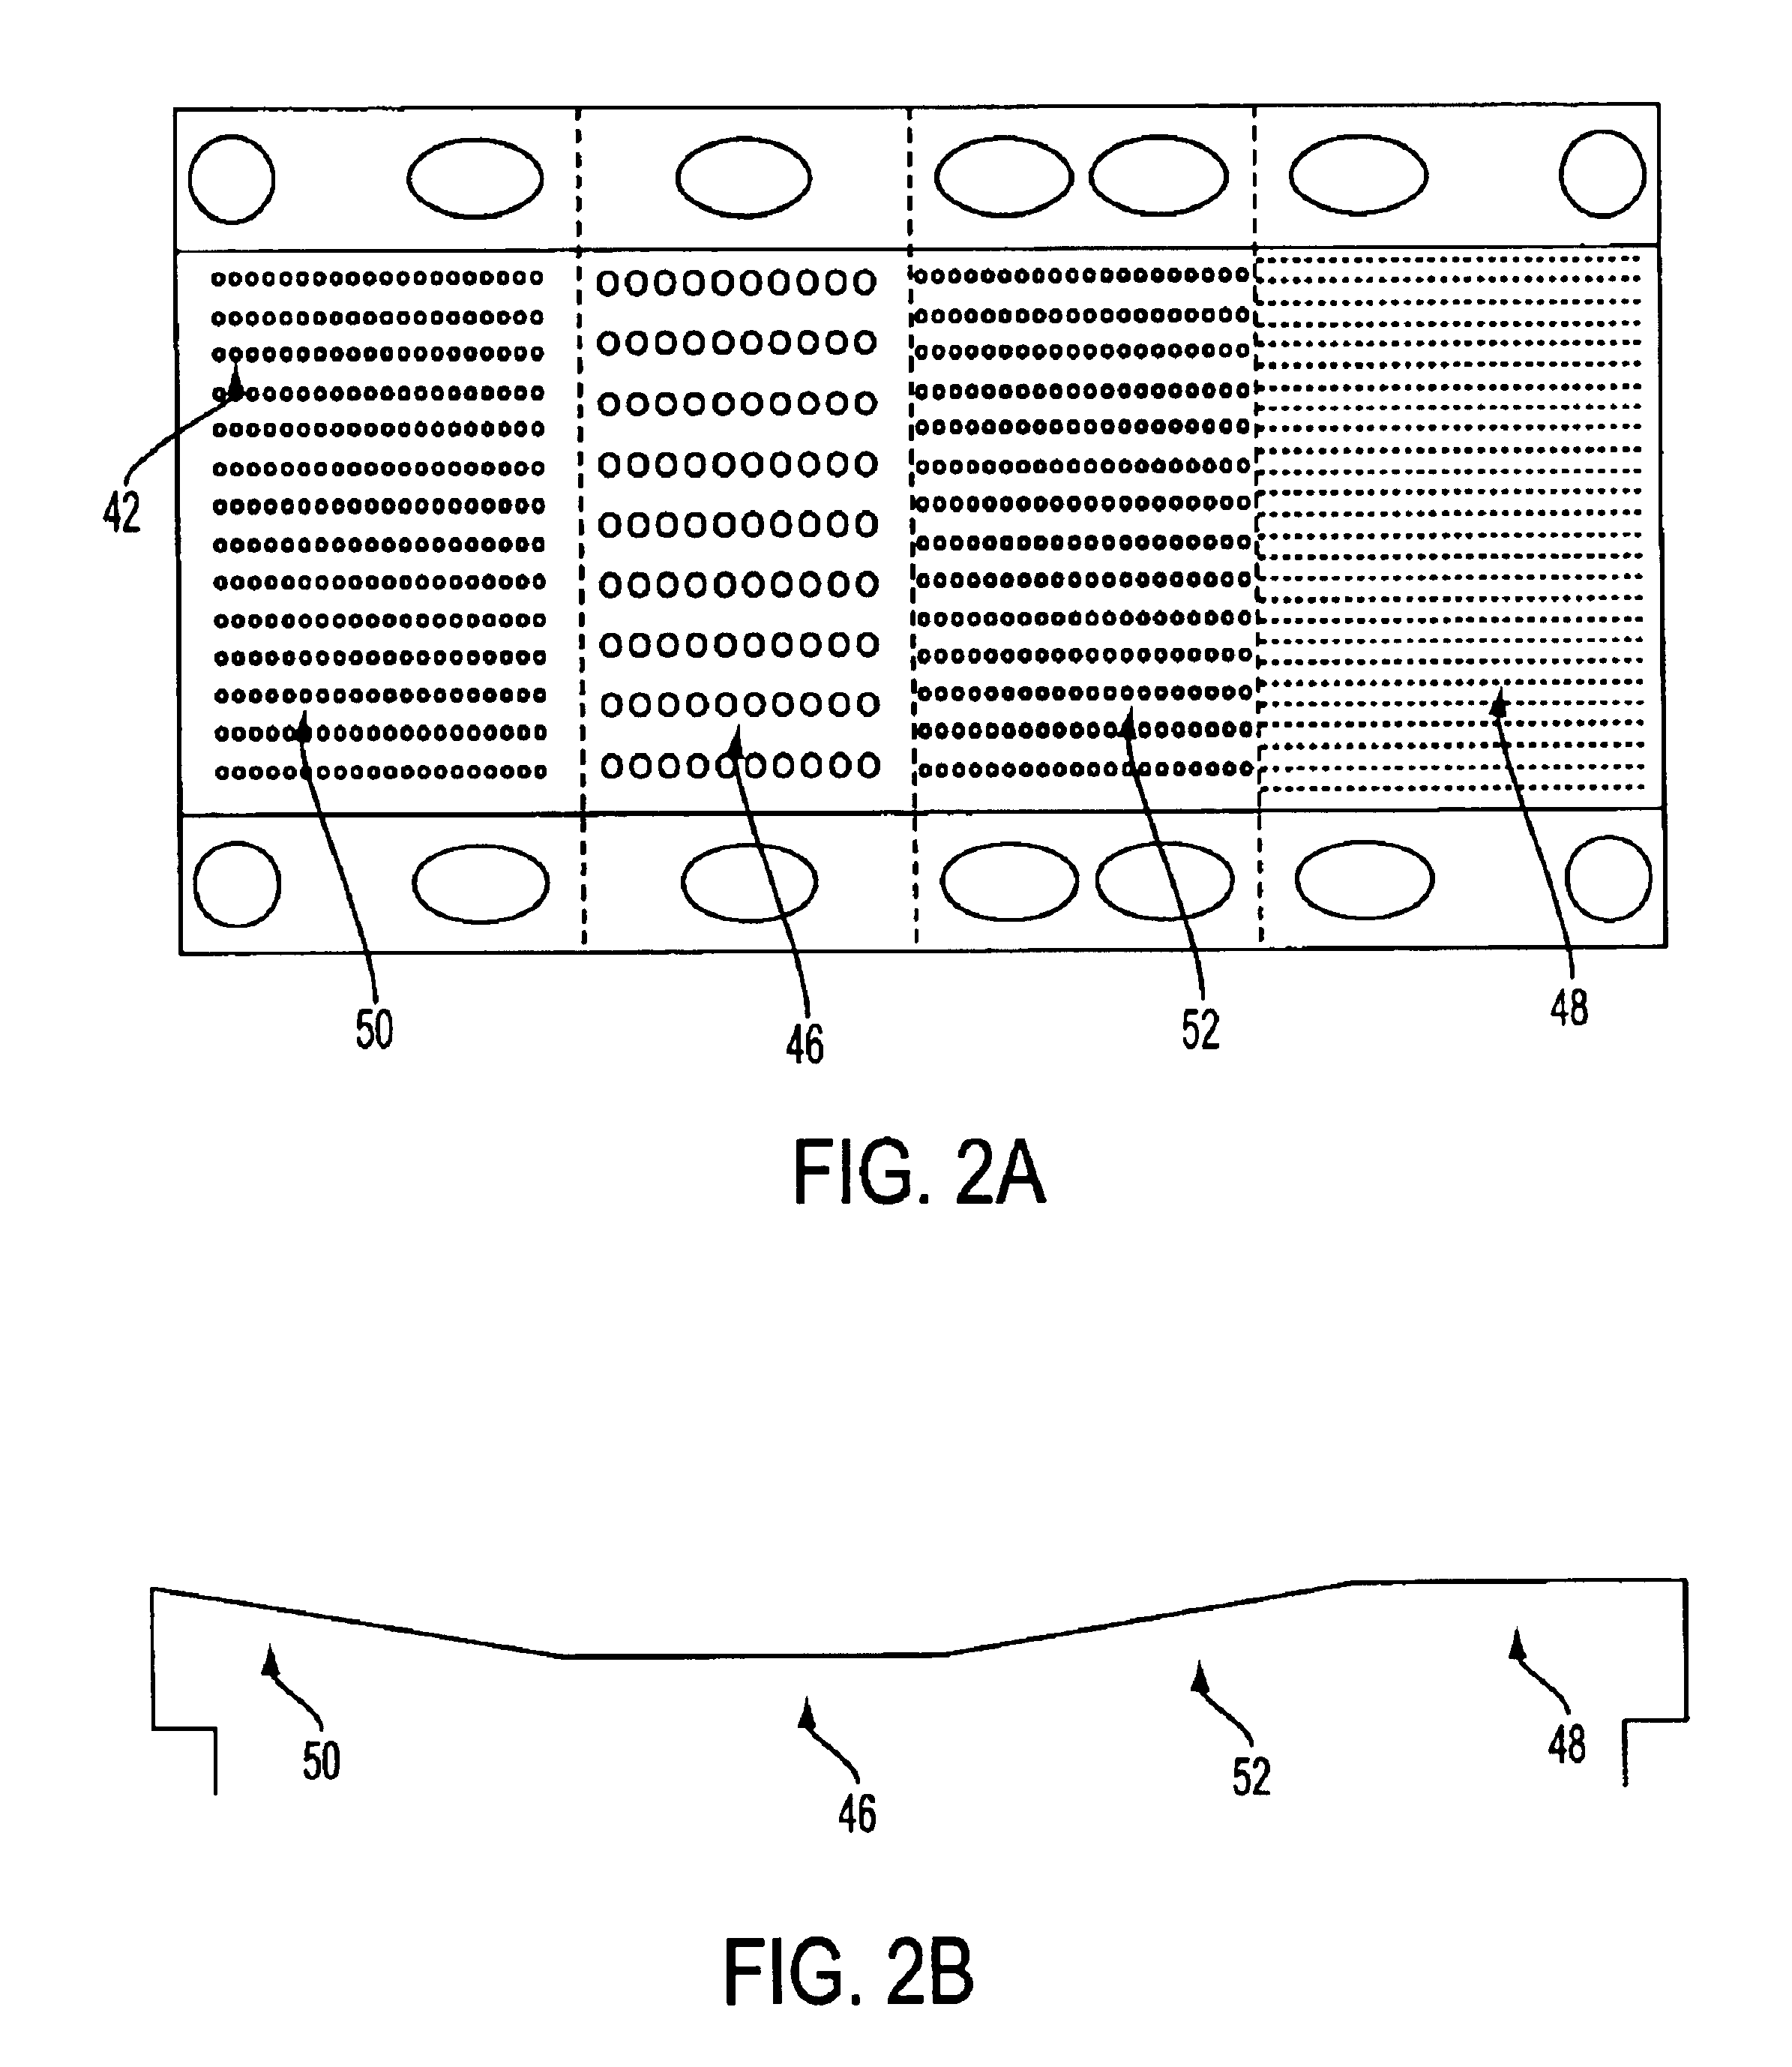 Absorbent article, method and apparatus for preparing same